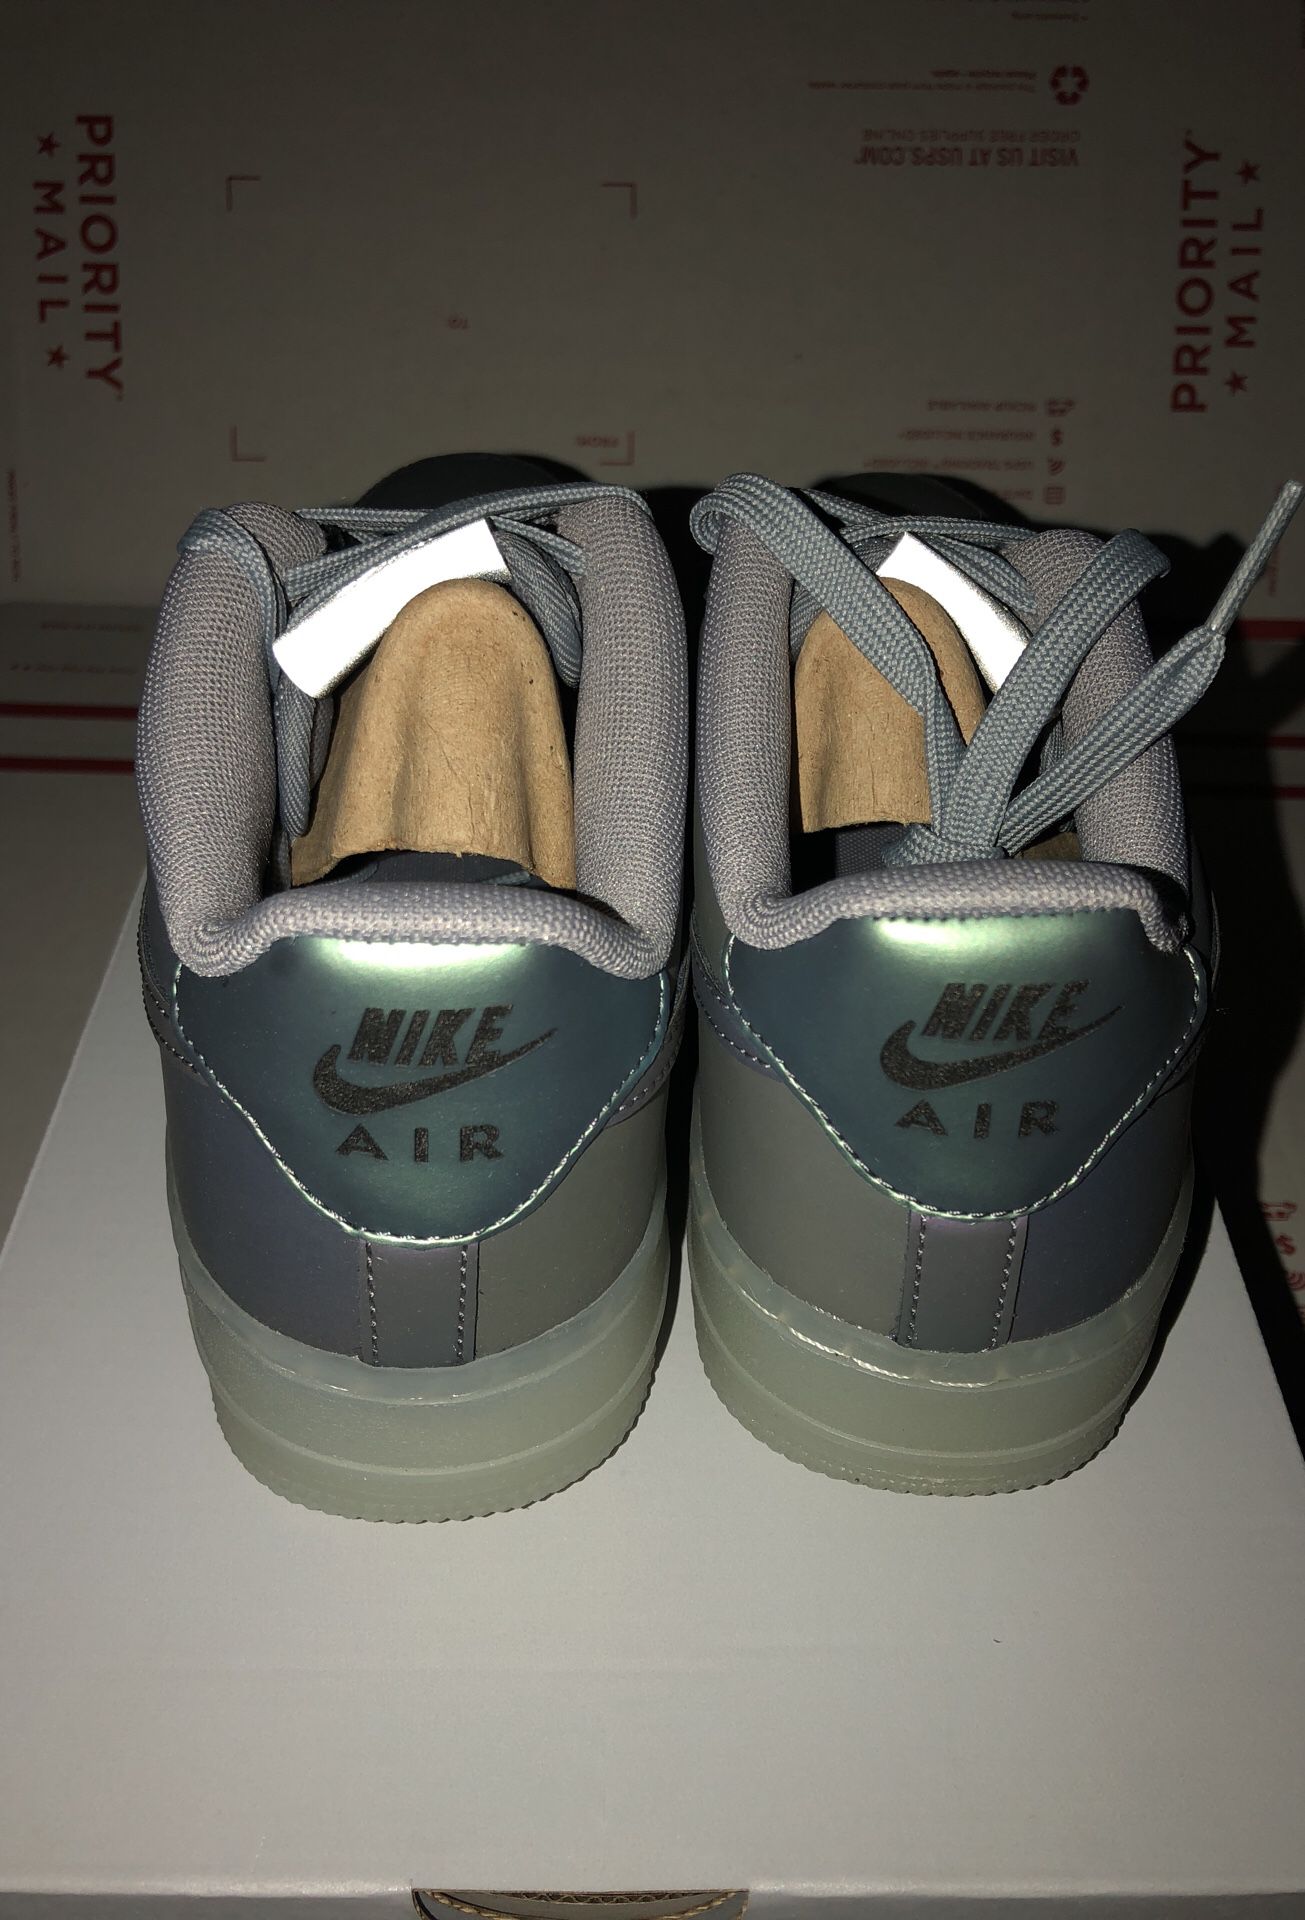 820438-005] NIKE AIR FORCE 1 LV8 ANTHRACITE STEALTH GRADE SCHOOL KIDS Sz 5  for Sale in Bonita, CA - OfferUp